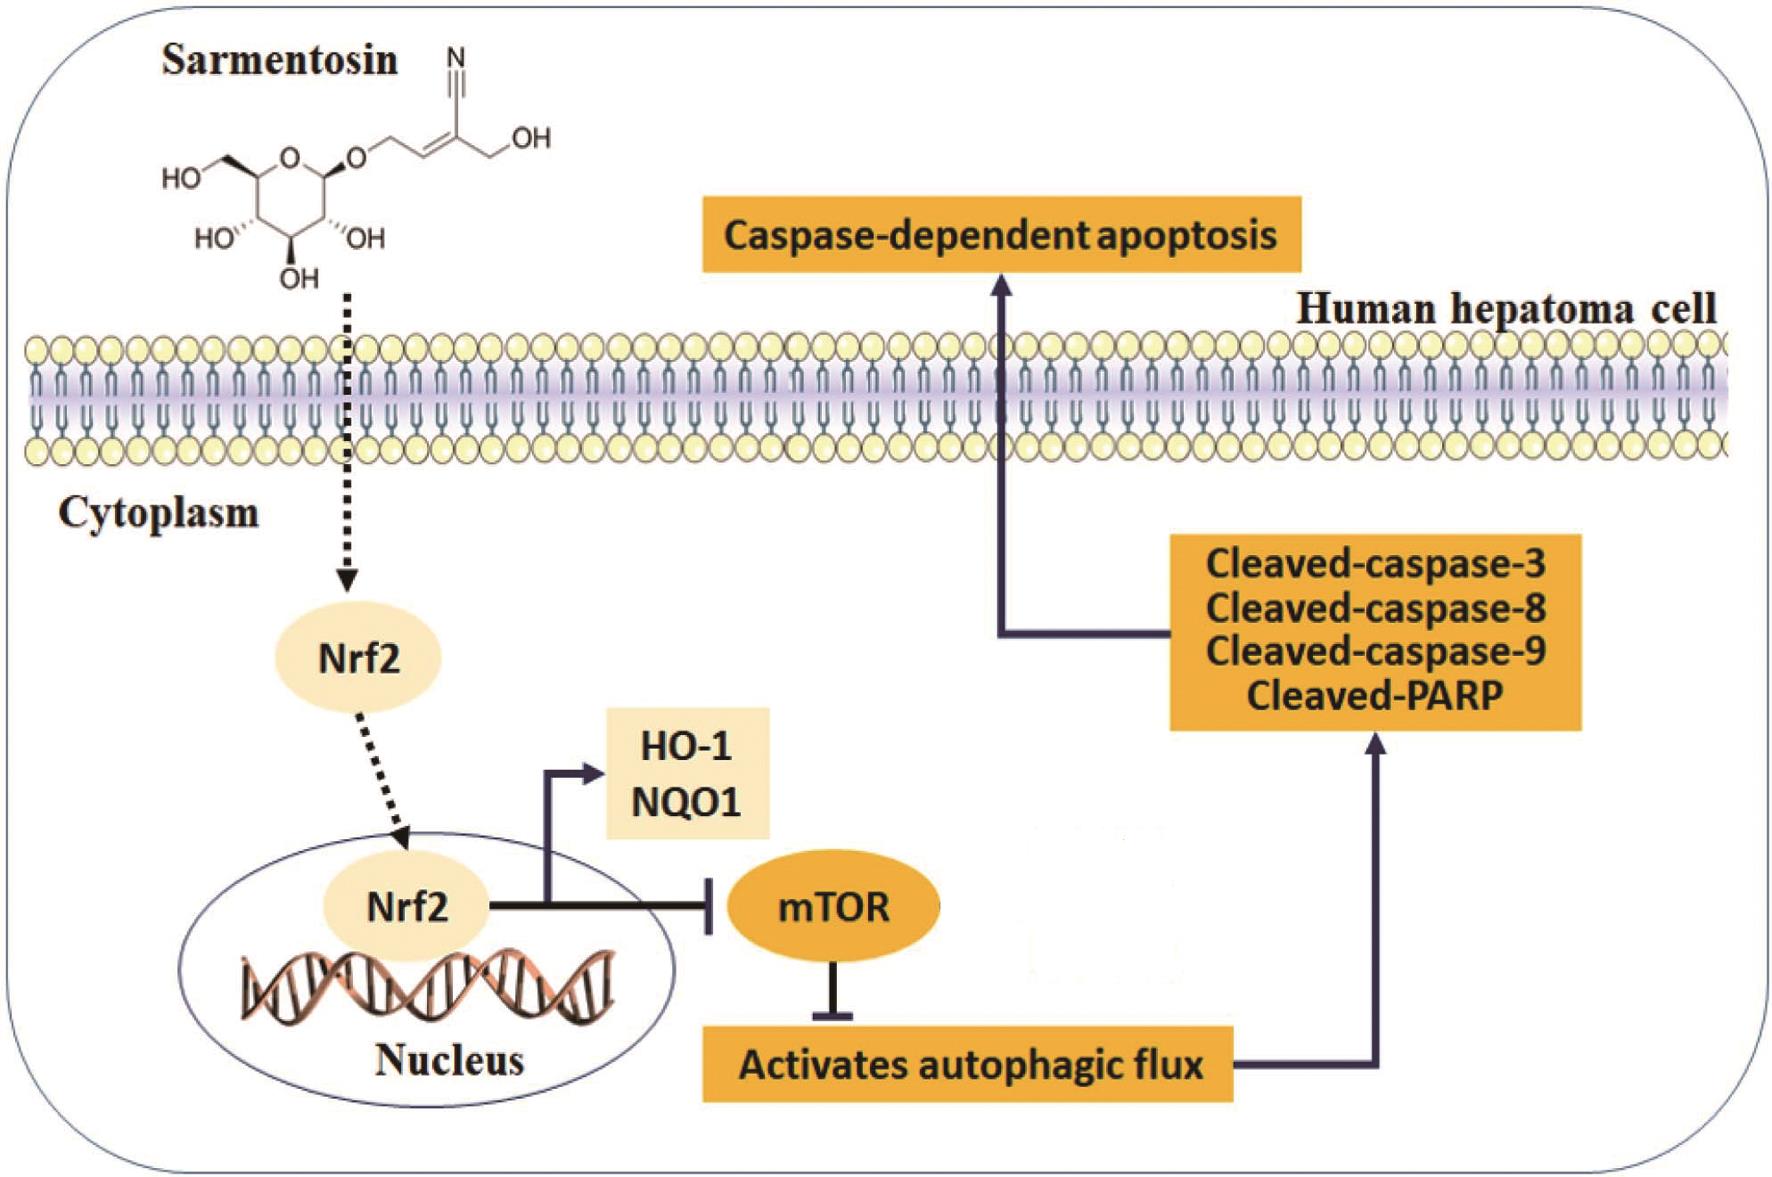 Illustration of the mechanism by which sarmentosin stimulated autophagy-dependent apoptosis in HCC cells.